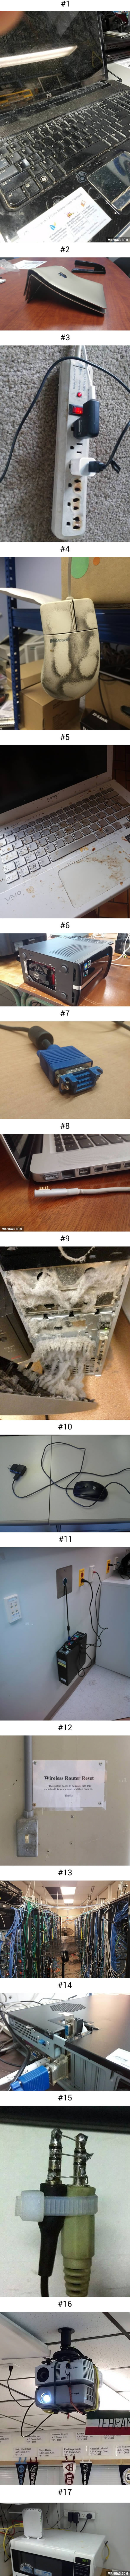 17 photos that will make your IT person want to cry